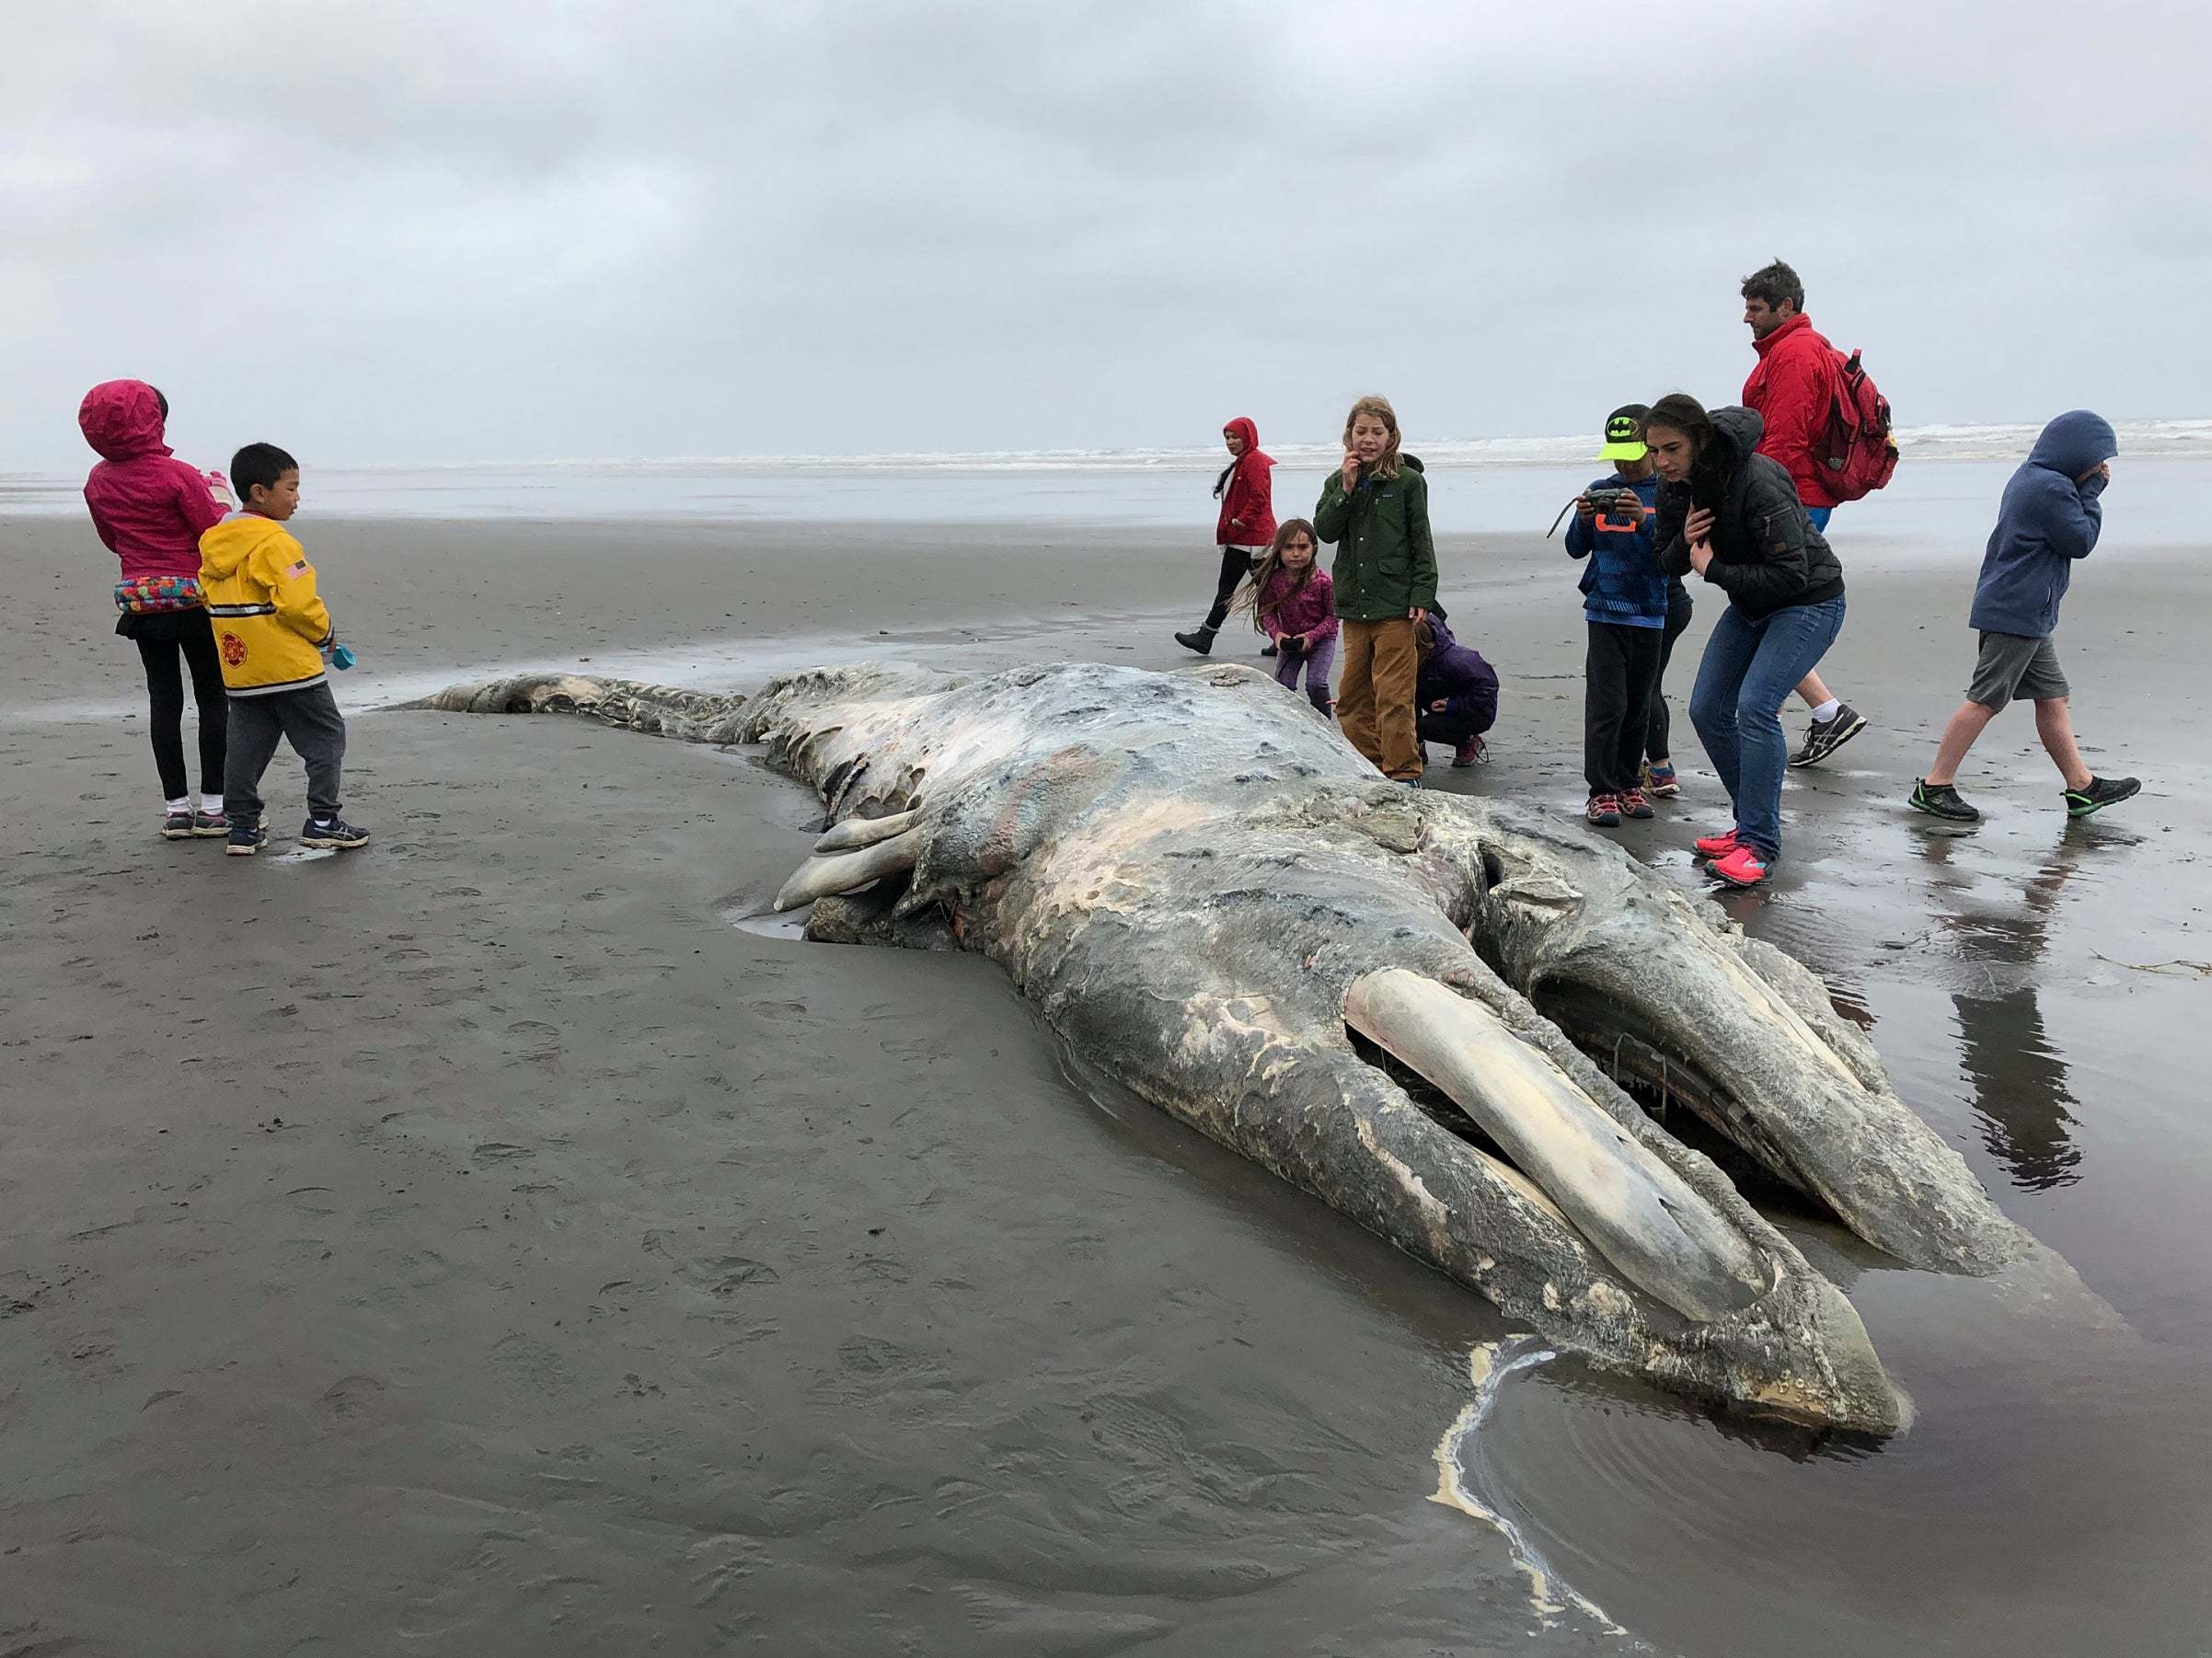 Teachers and students from Northwest Montessori School in Seattle examine the carcass of a gray whale after it washed up on the coast of Washington's Olympic Peninsula in May this year